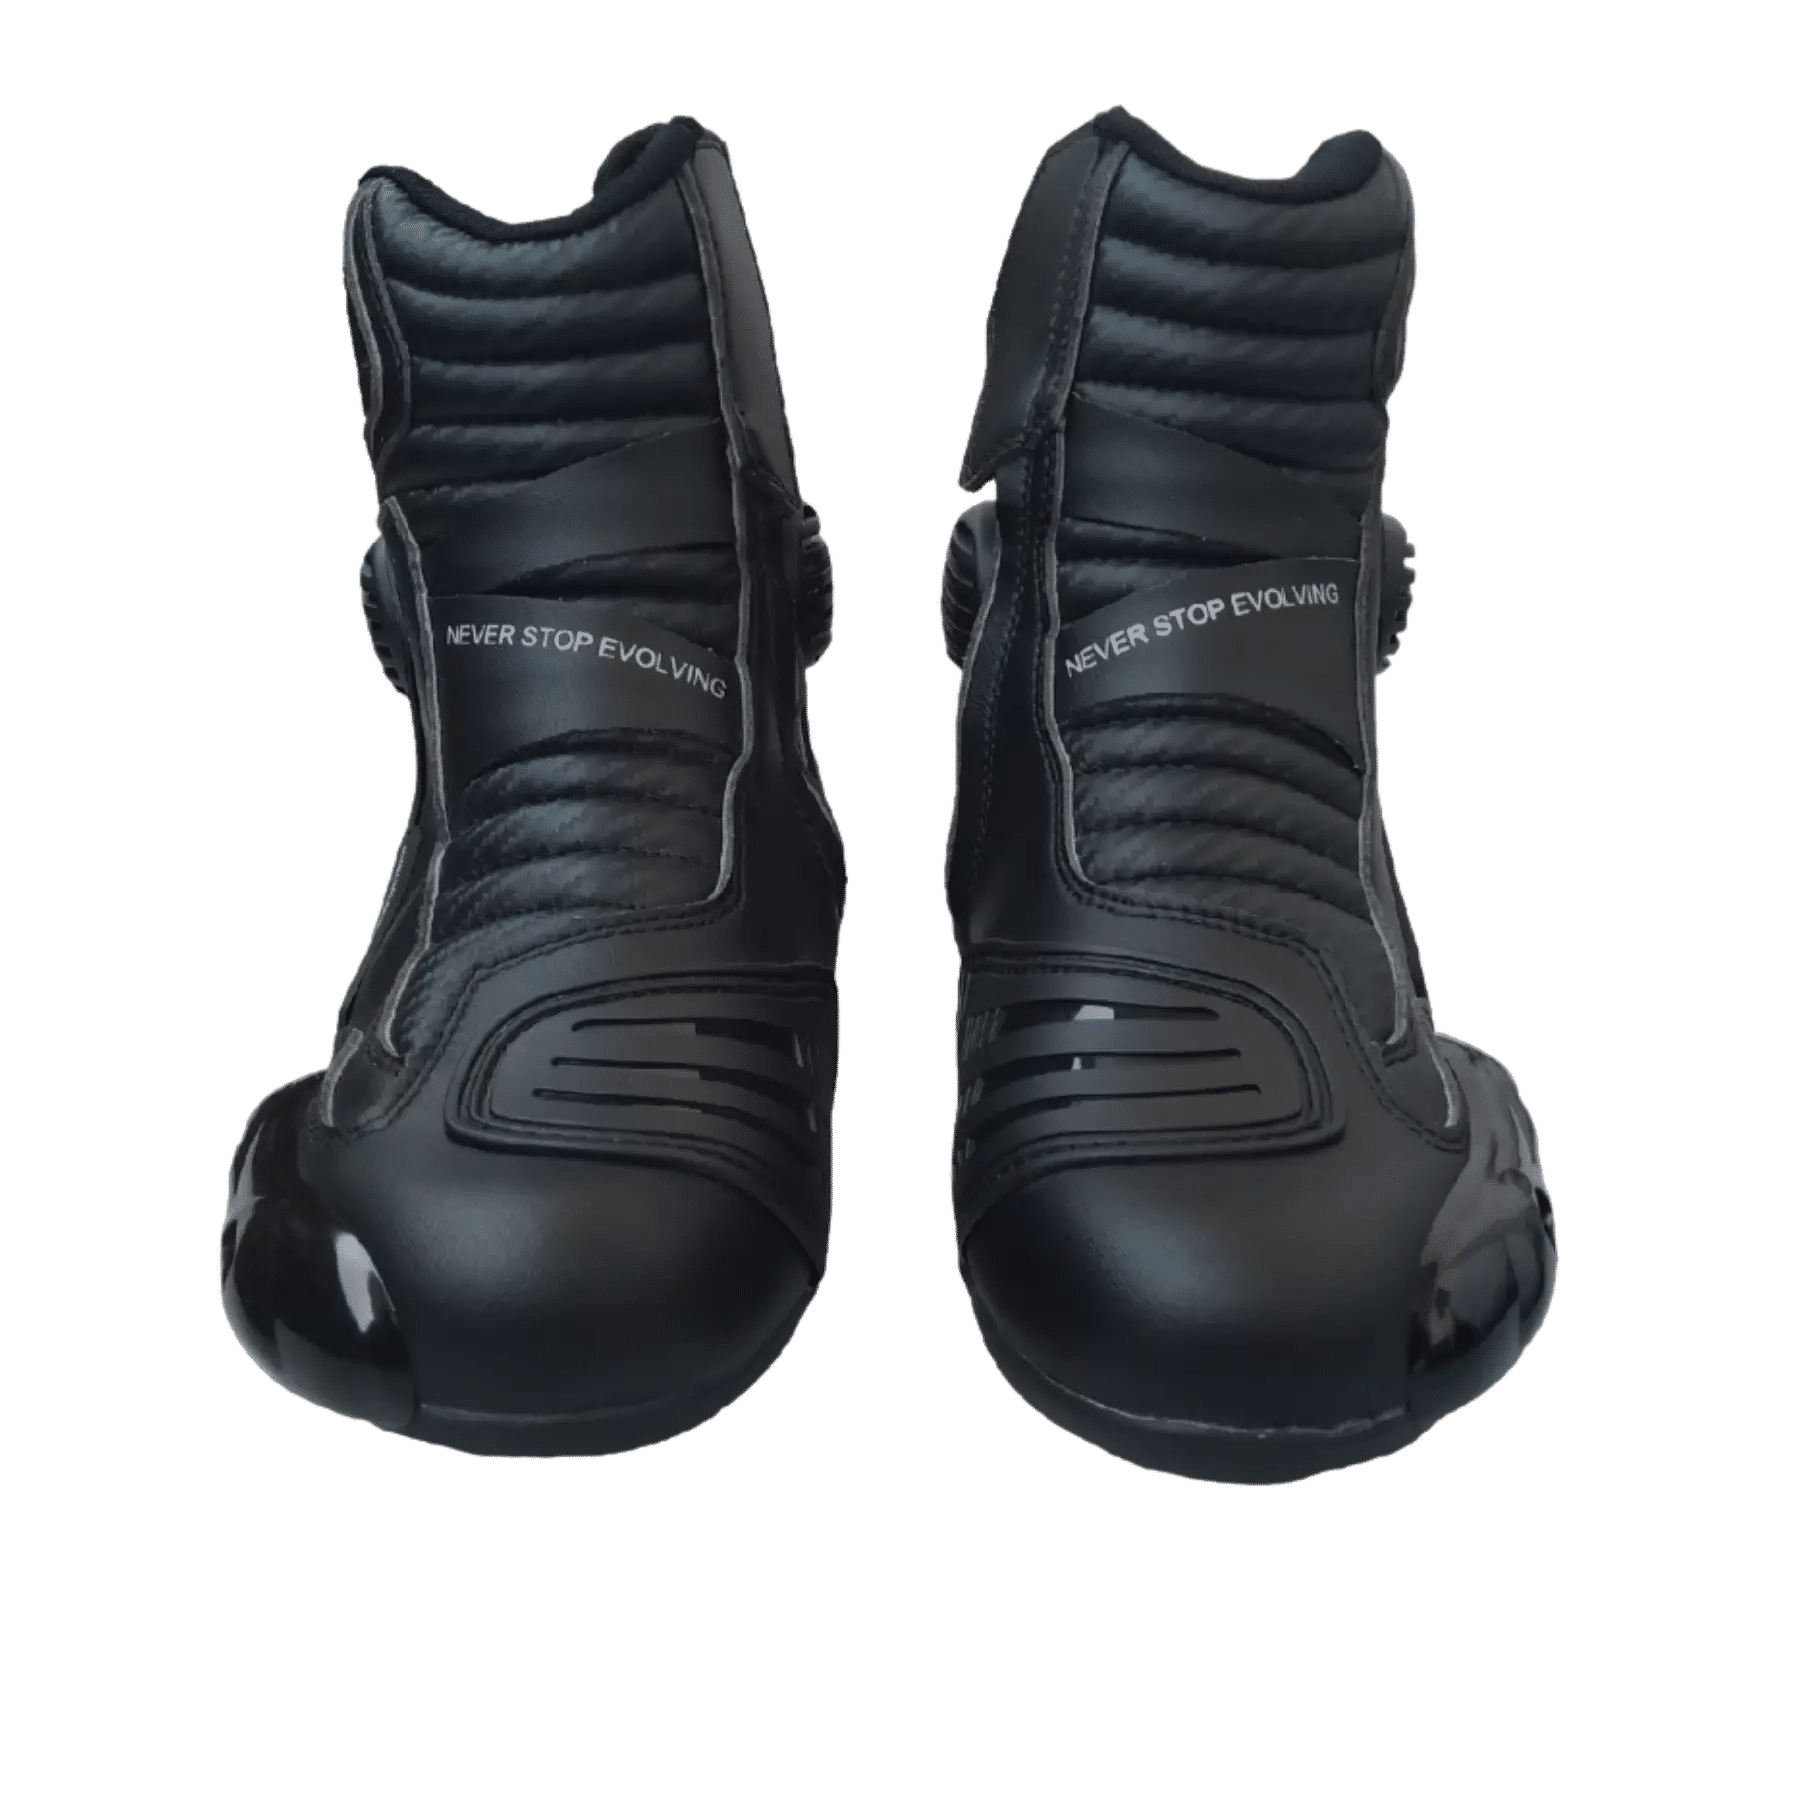 These are product images of Riding Boots by MotoTech on rent by SharePal in Bangalore.